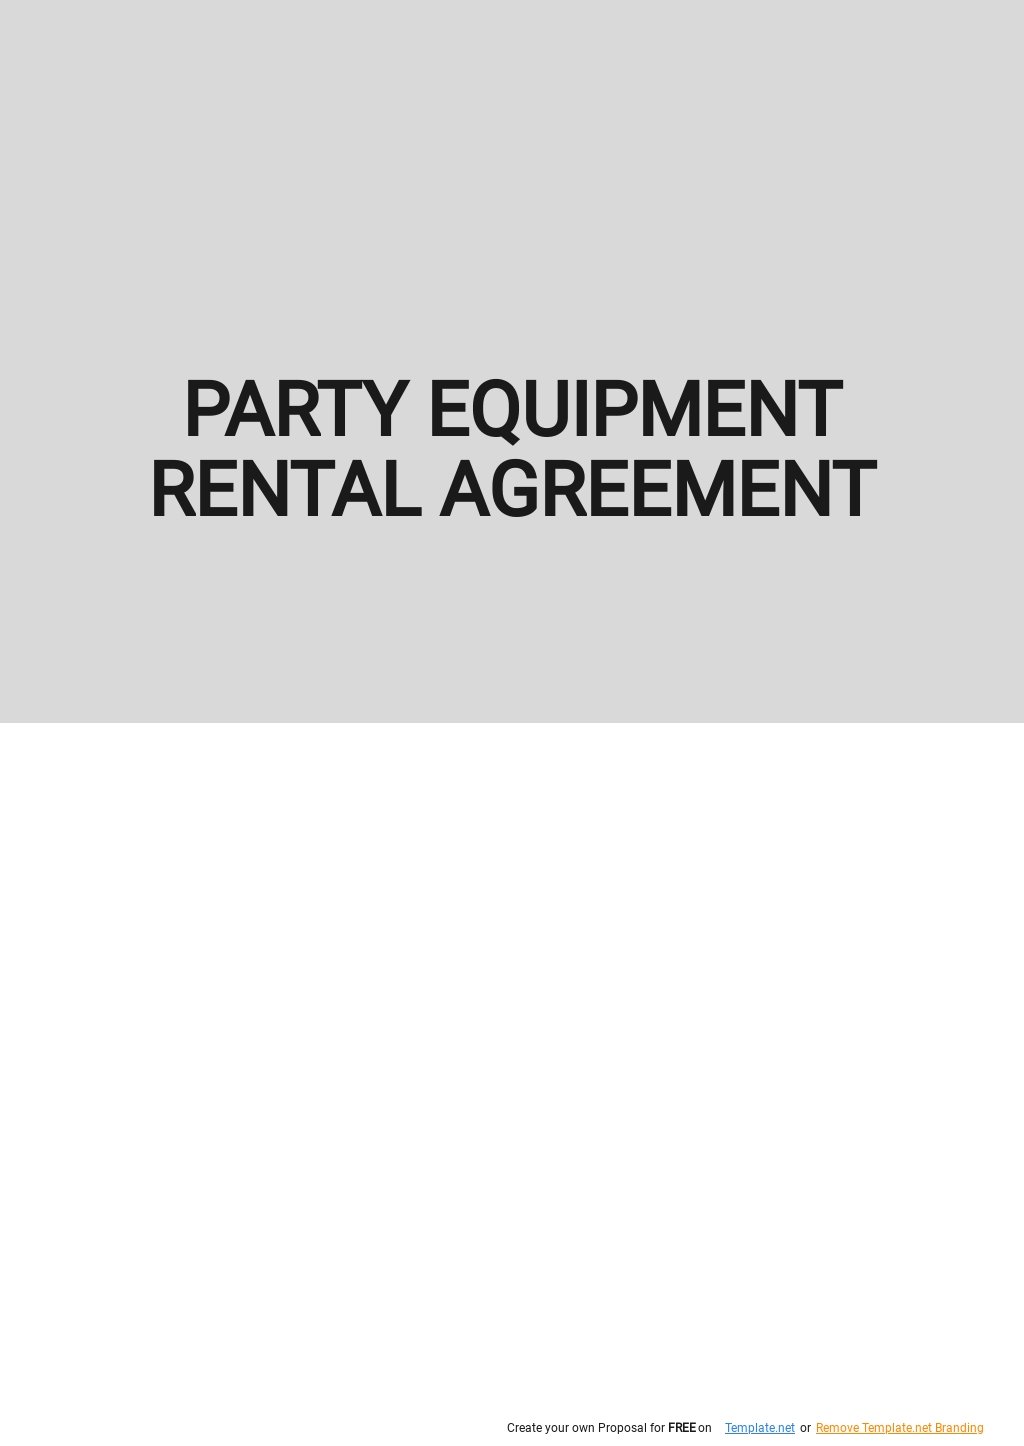 Party Equipment Rental Agreement Template - Google Docs, Word Throughout party equipment rental agreement template